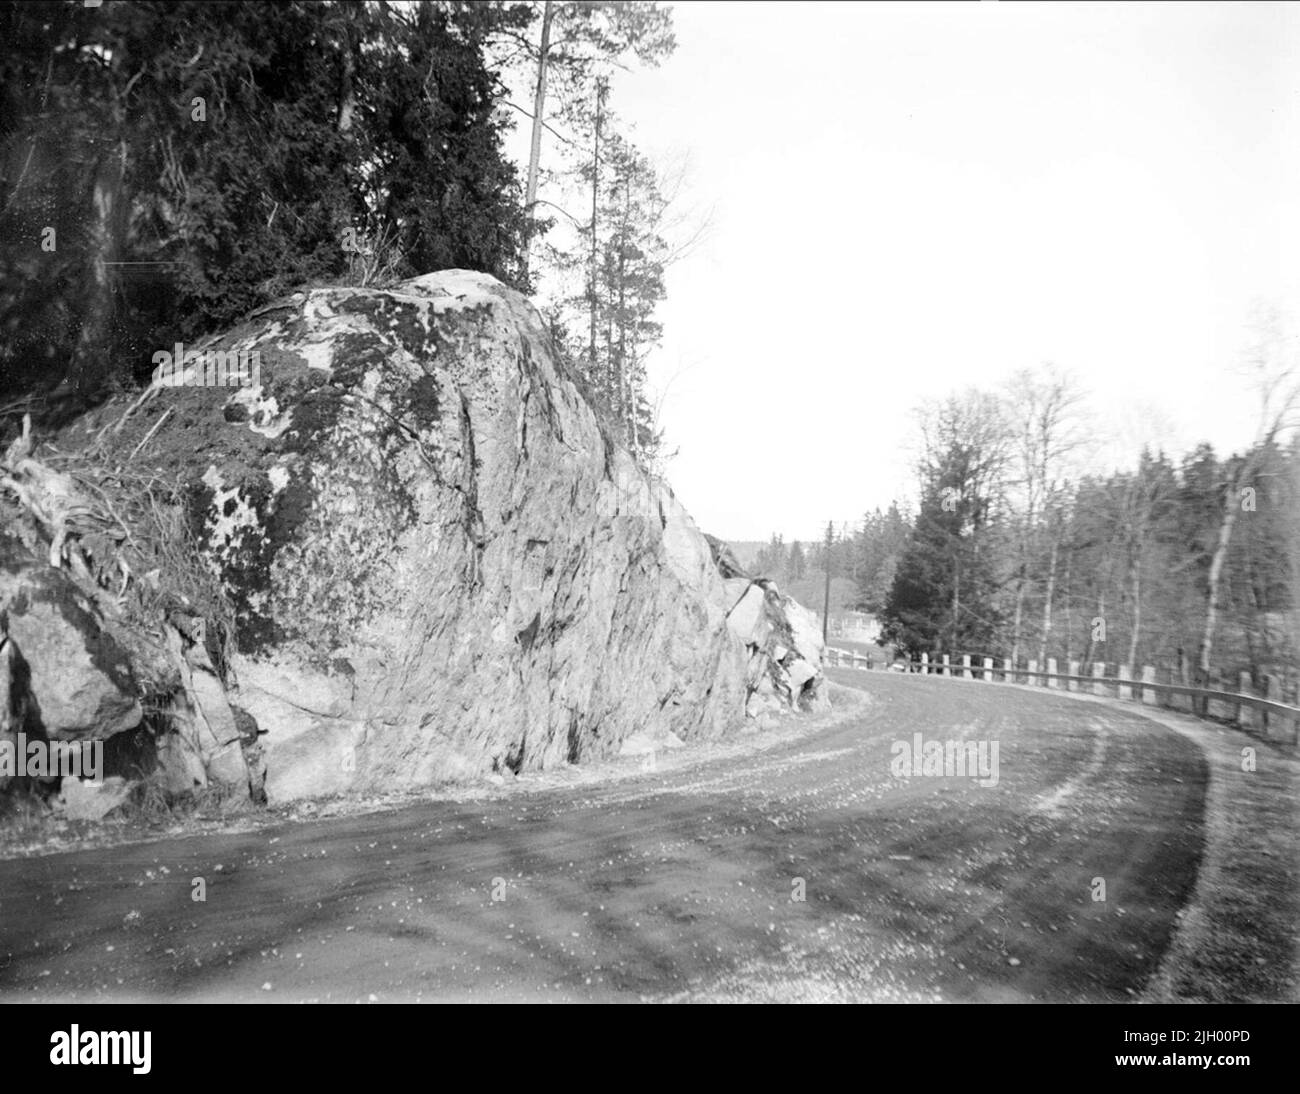 Large boulders, the one of some called Lurbook cliff, alongside the road in Lurbo, Gottsunda, Uppsala in April 1934. Large boulders, the one of some called Lurbook cliff, alongside the road in Lurbo, Gottsunda, Uppsala in April 1934 Stock Photo